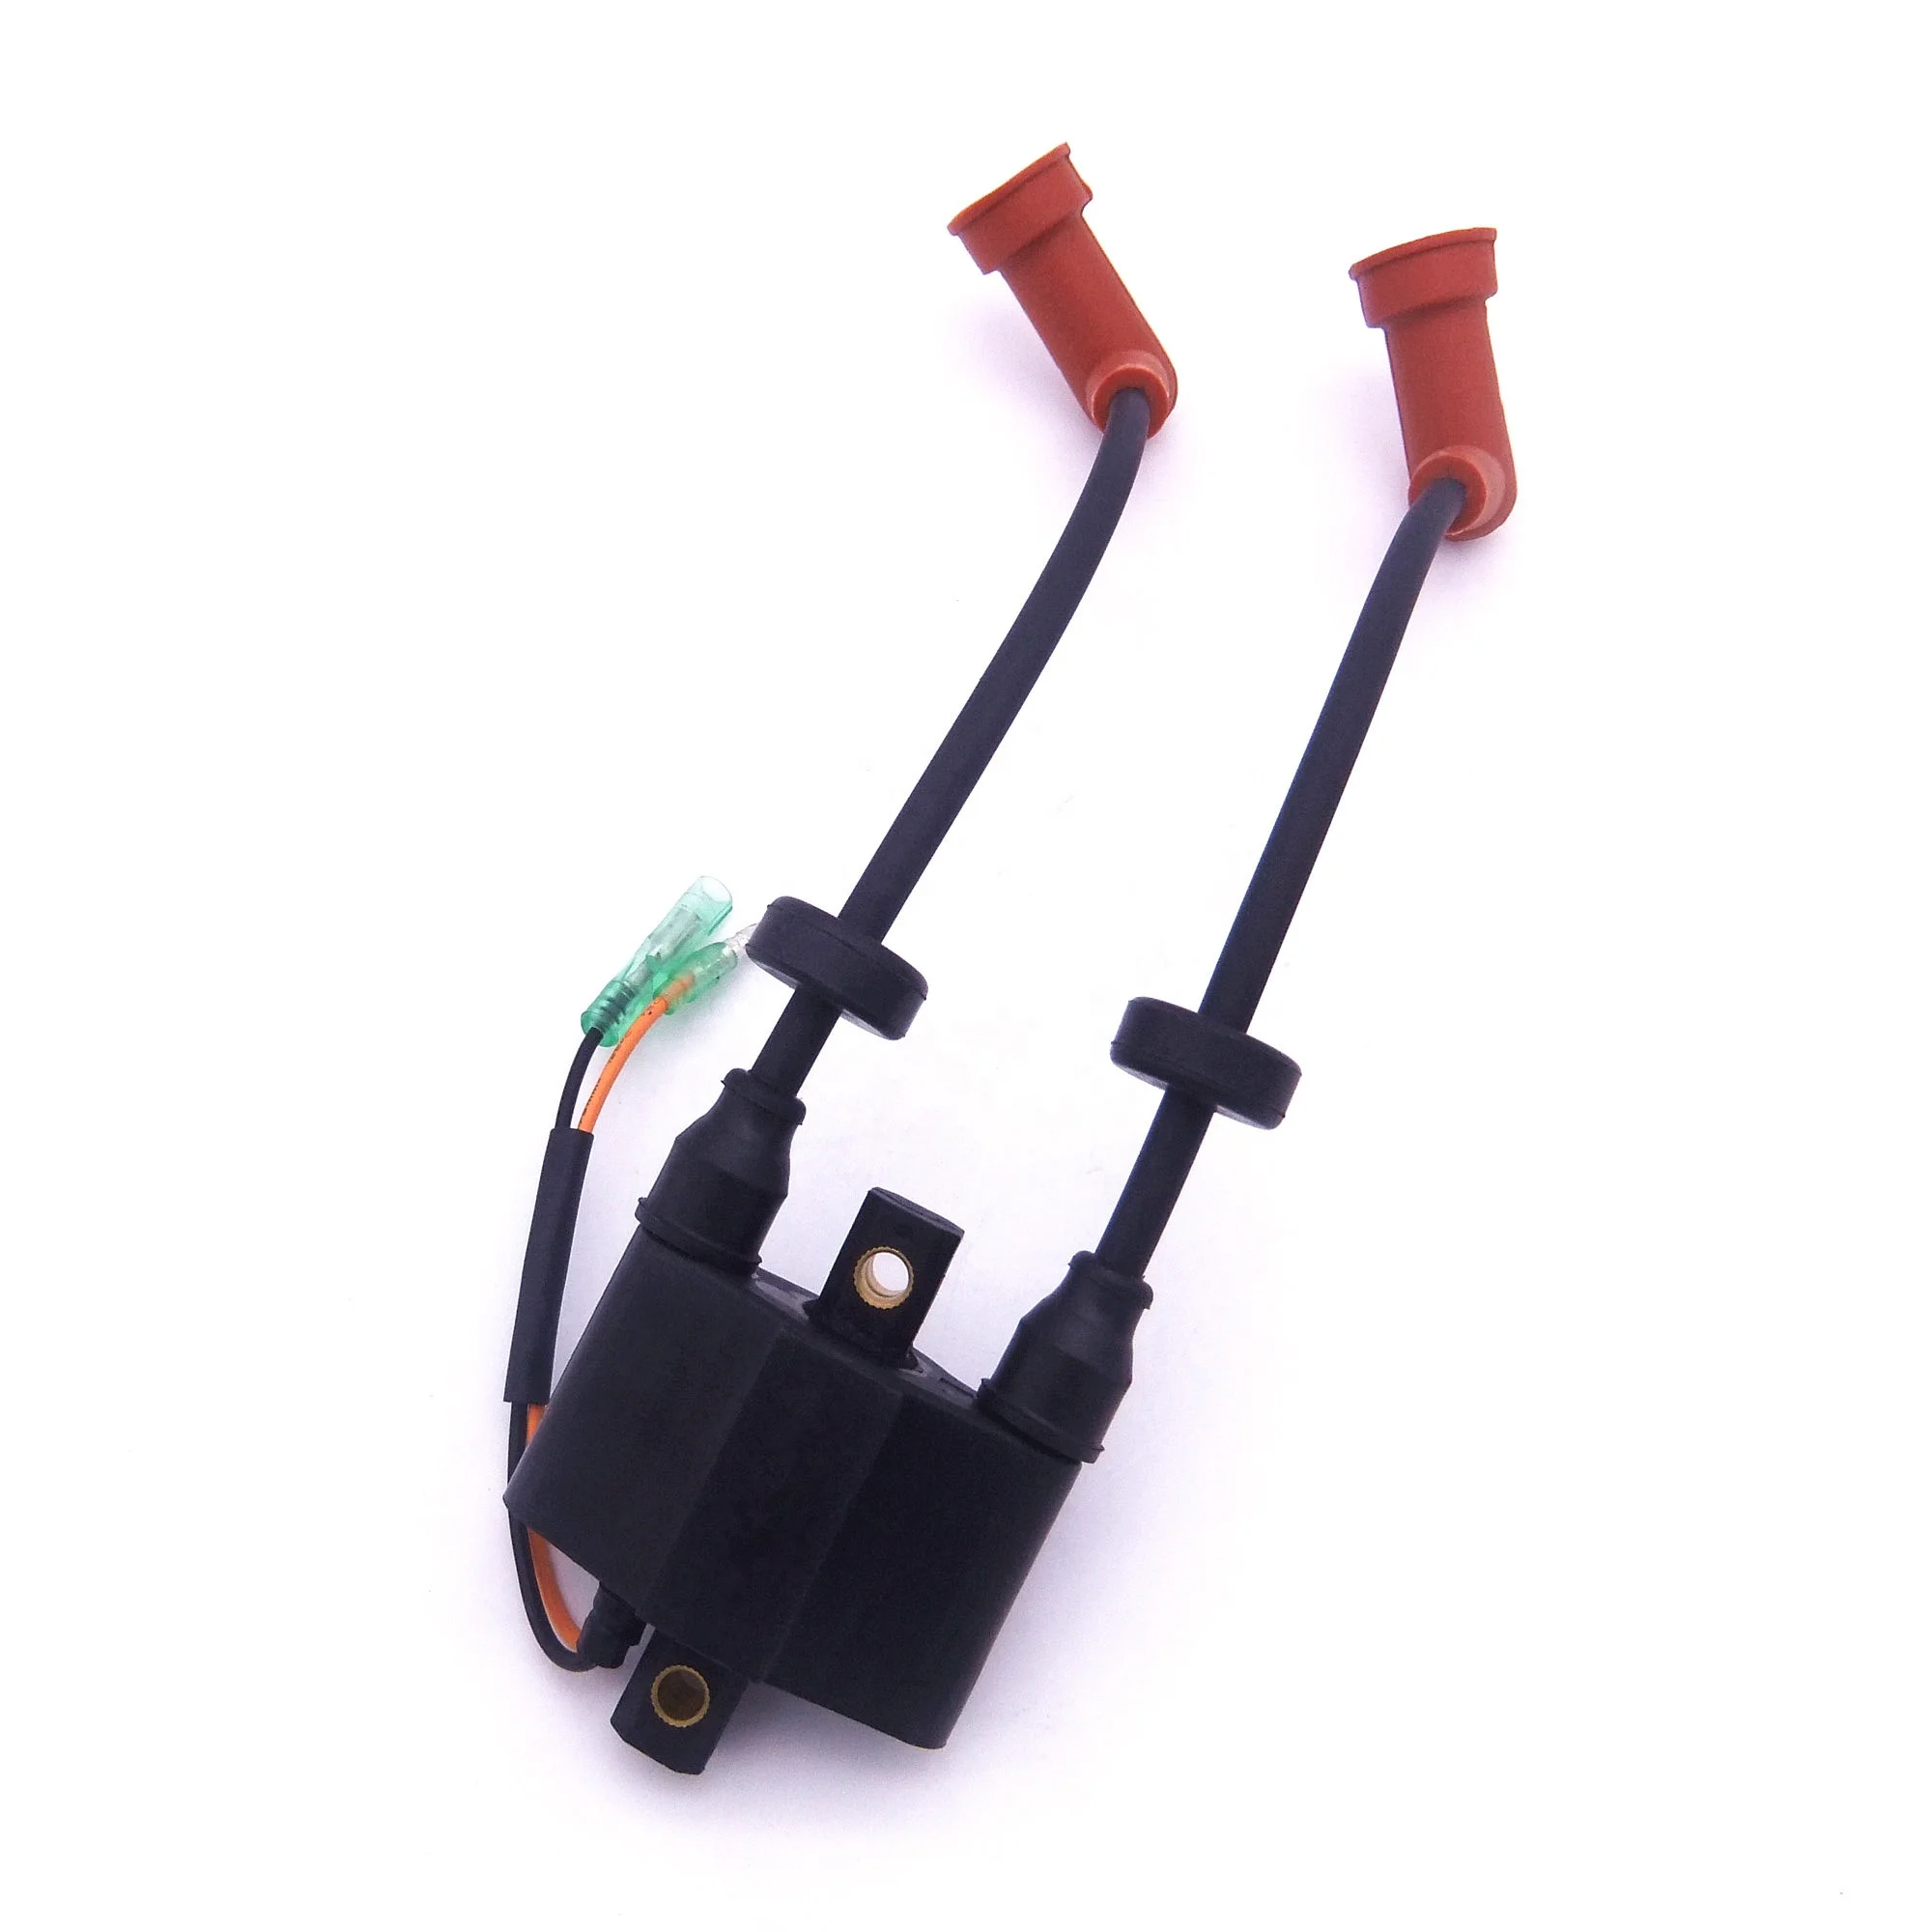 Boat Motor Genuine OEM Made in Japan 680-85570-00 01 09 Ignition Coil Assy Yamaha Outboard F6-20HP 2-stroke Engine 